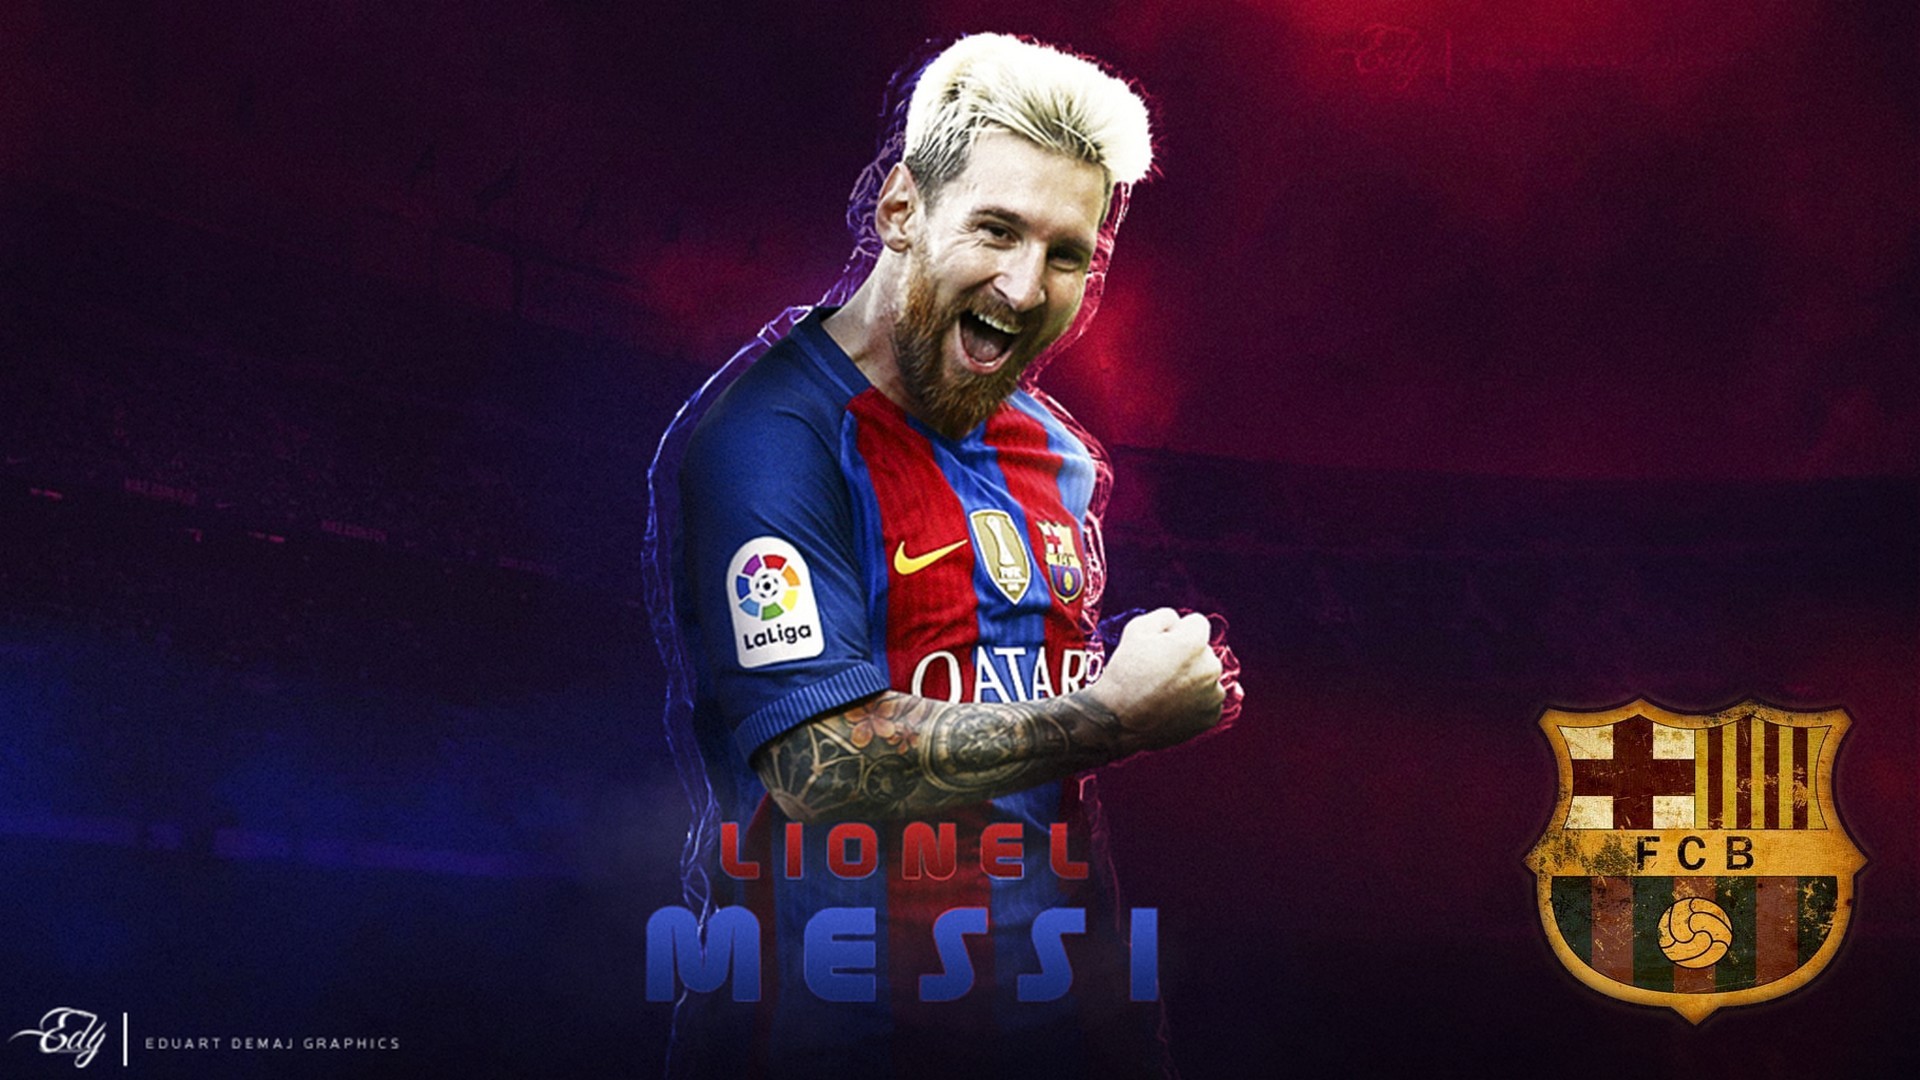 Messi Wallpaper HD With Resolution 1920X1080 pixel. You can make this wallpaper for your Mac or Windows Desktop Background, iPhone, Android or Tablet and another Smartphone device for free